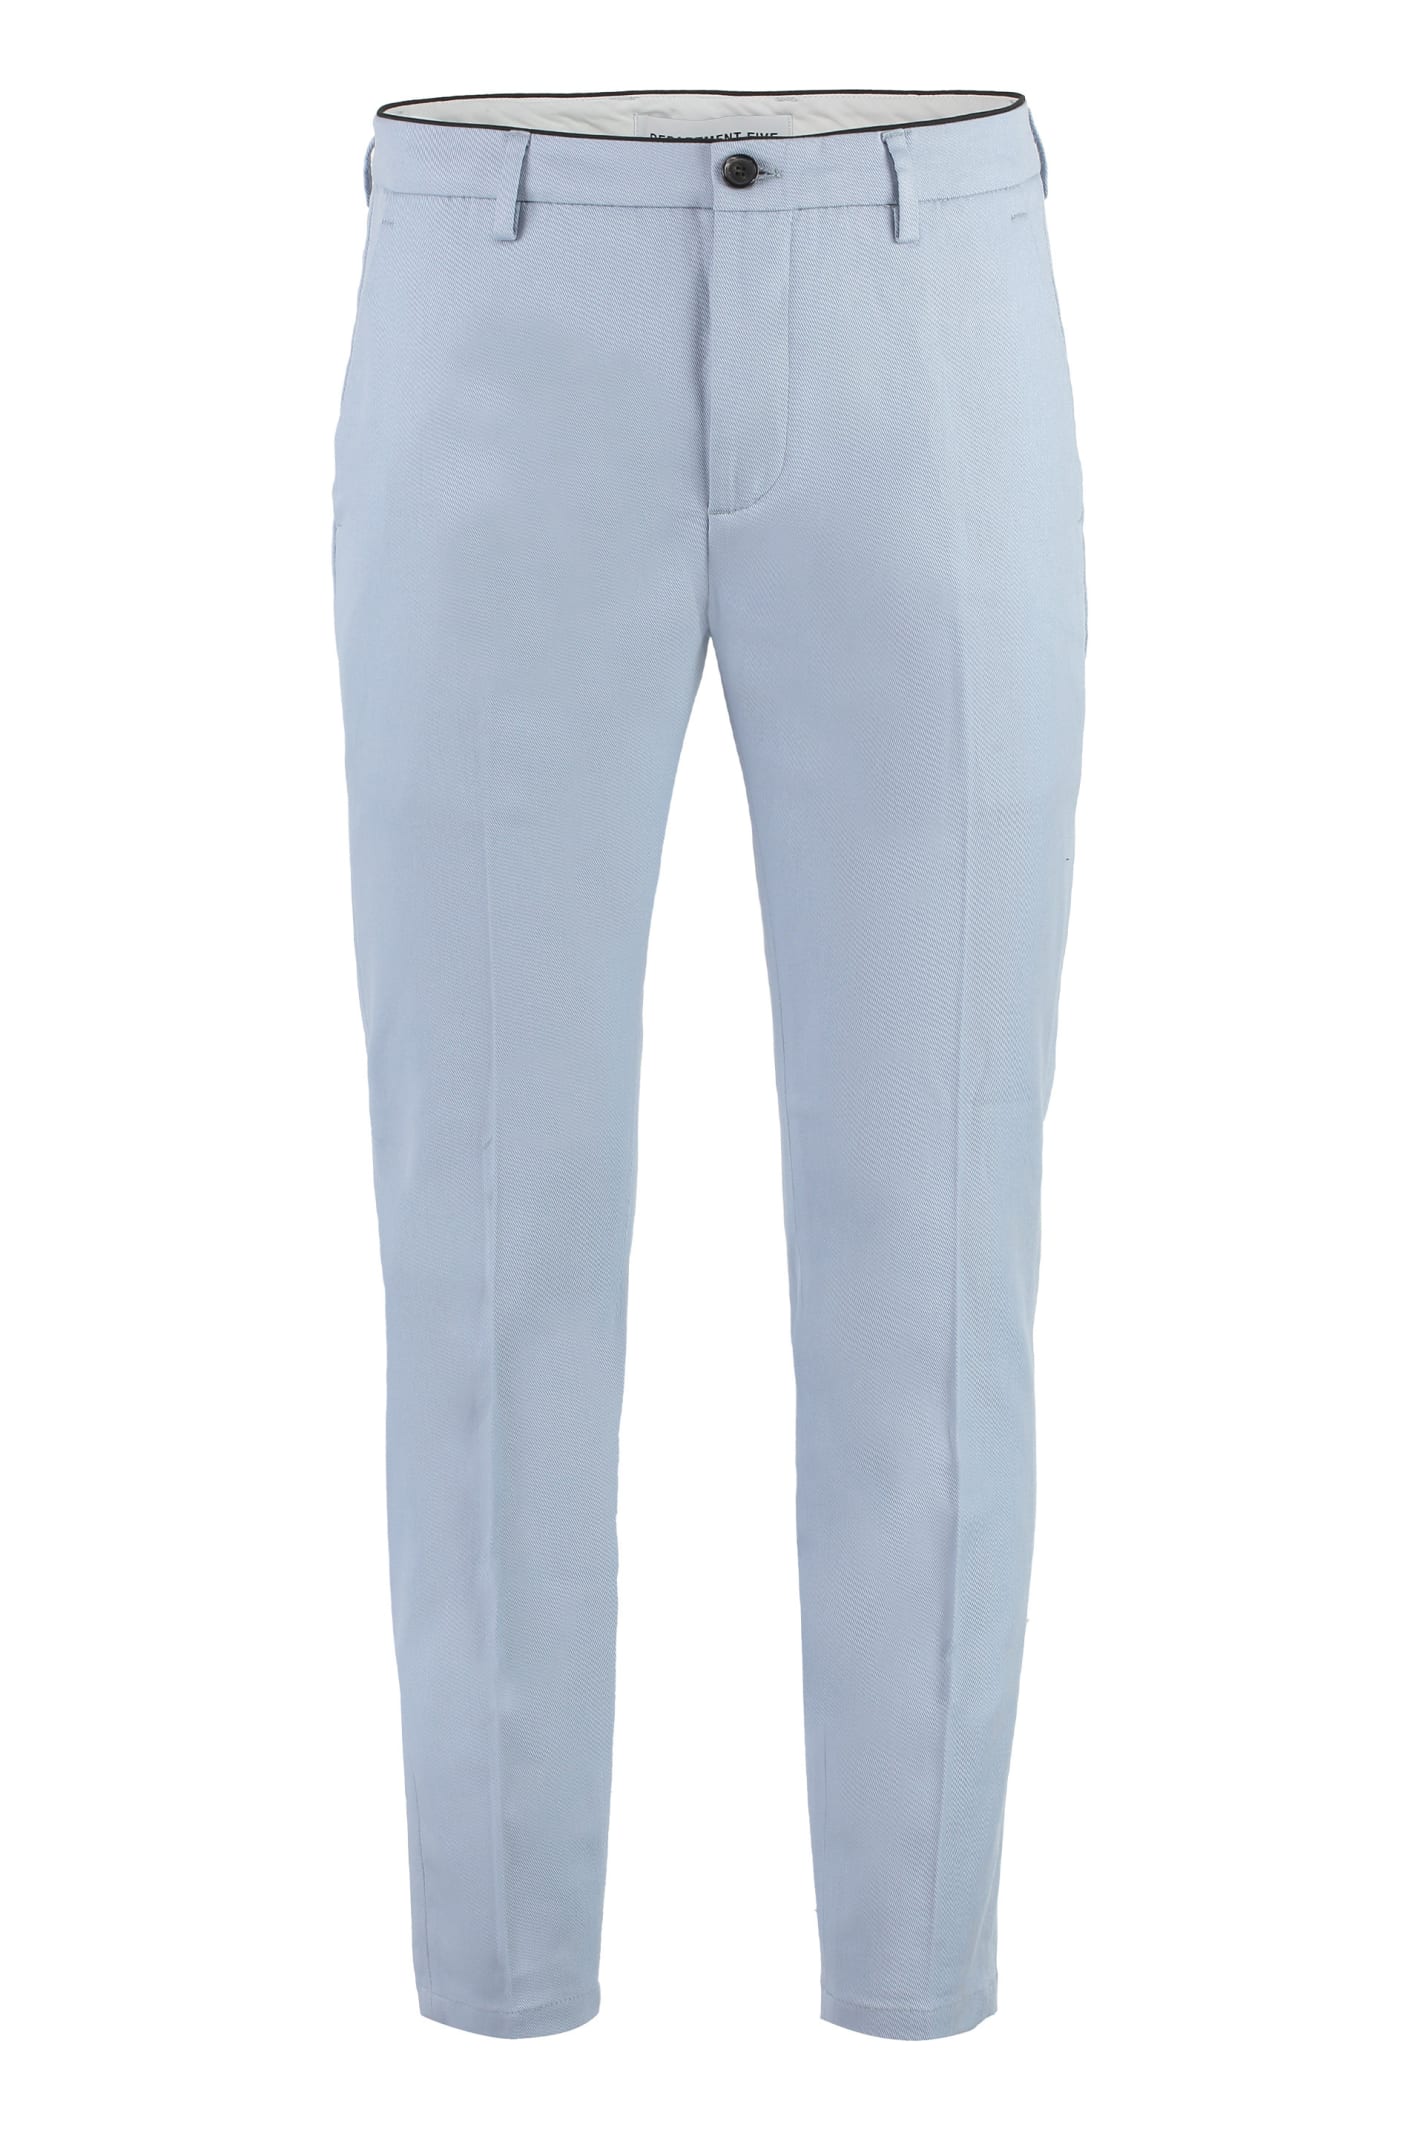 Department Five Prince Chino Pants In Light Blue